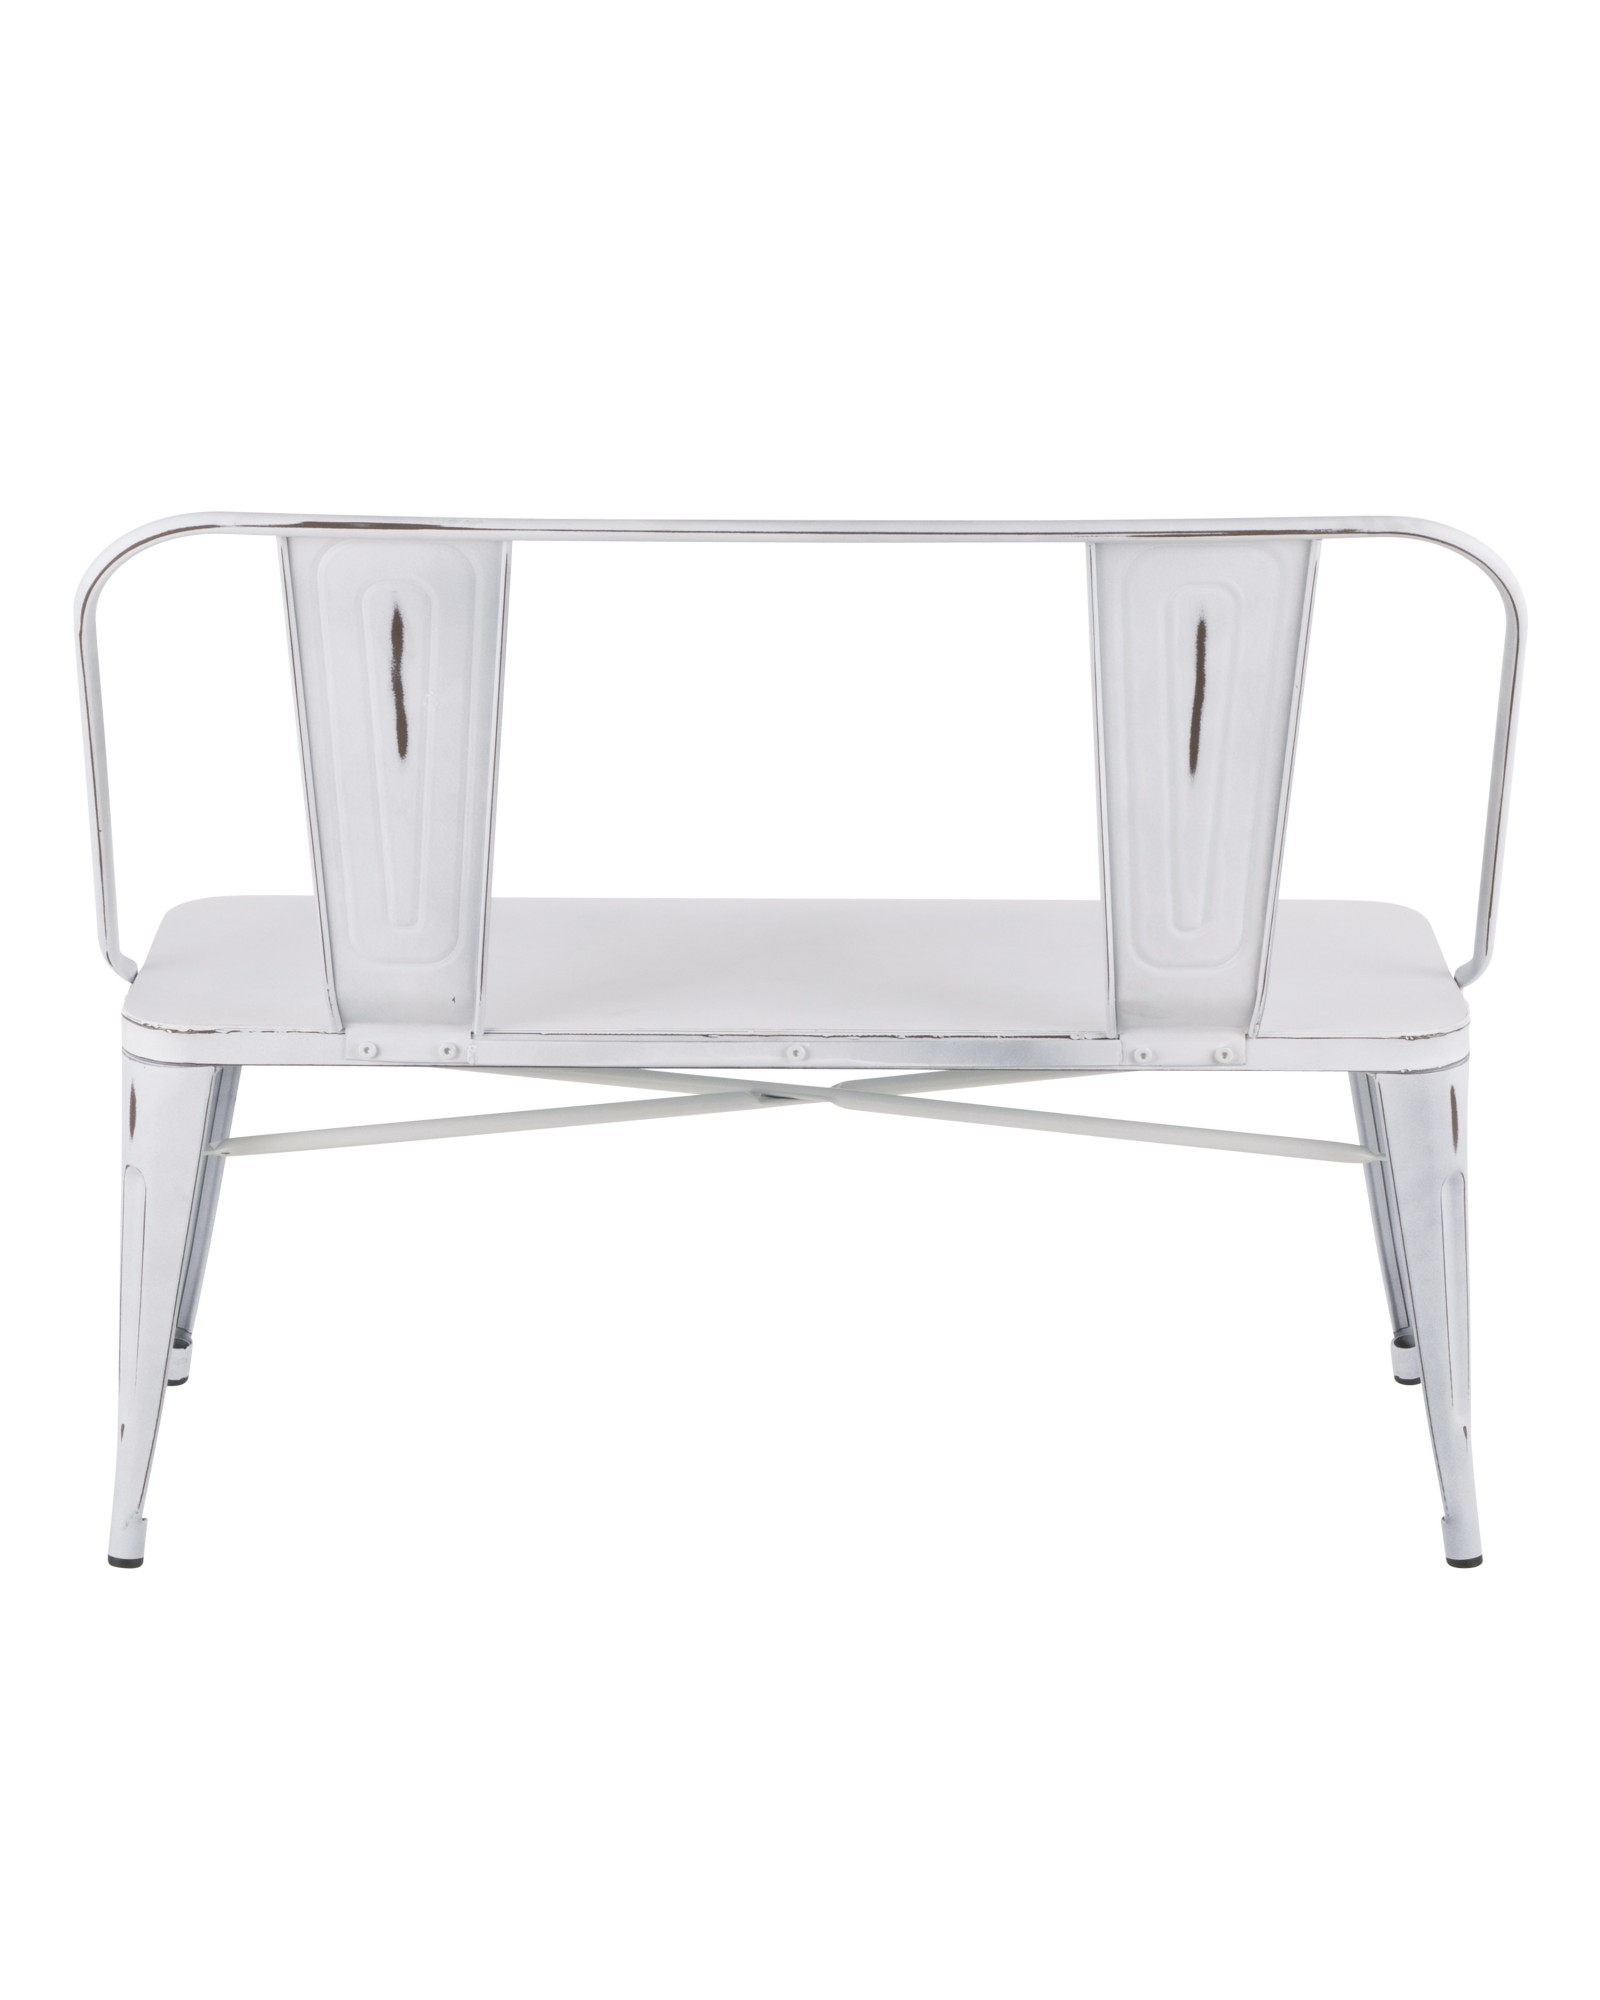 Oregon Industrial Metal Dining/Entryway Bench with Distressed Vintage White Finish